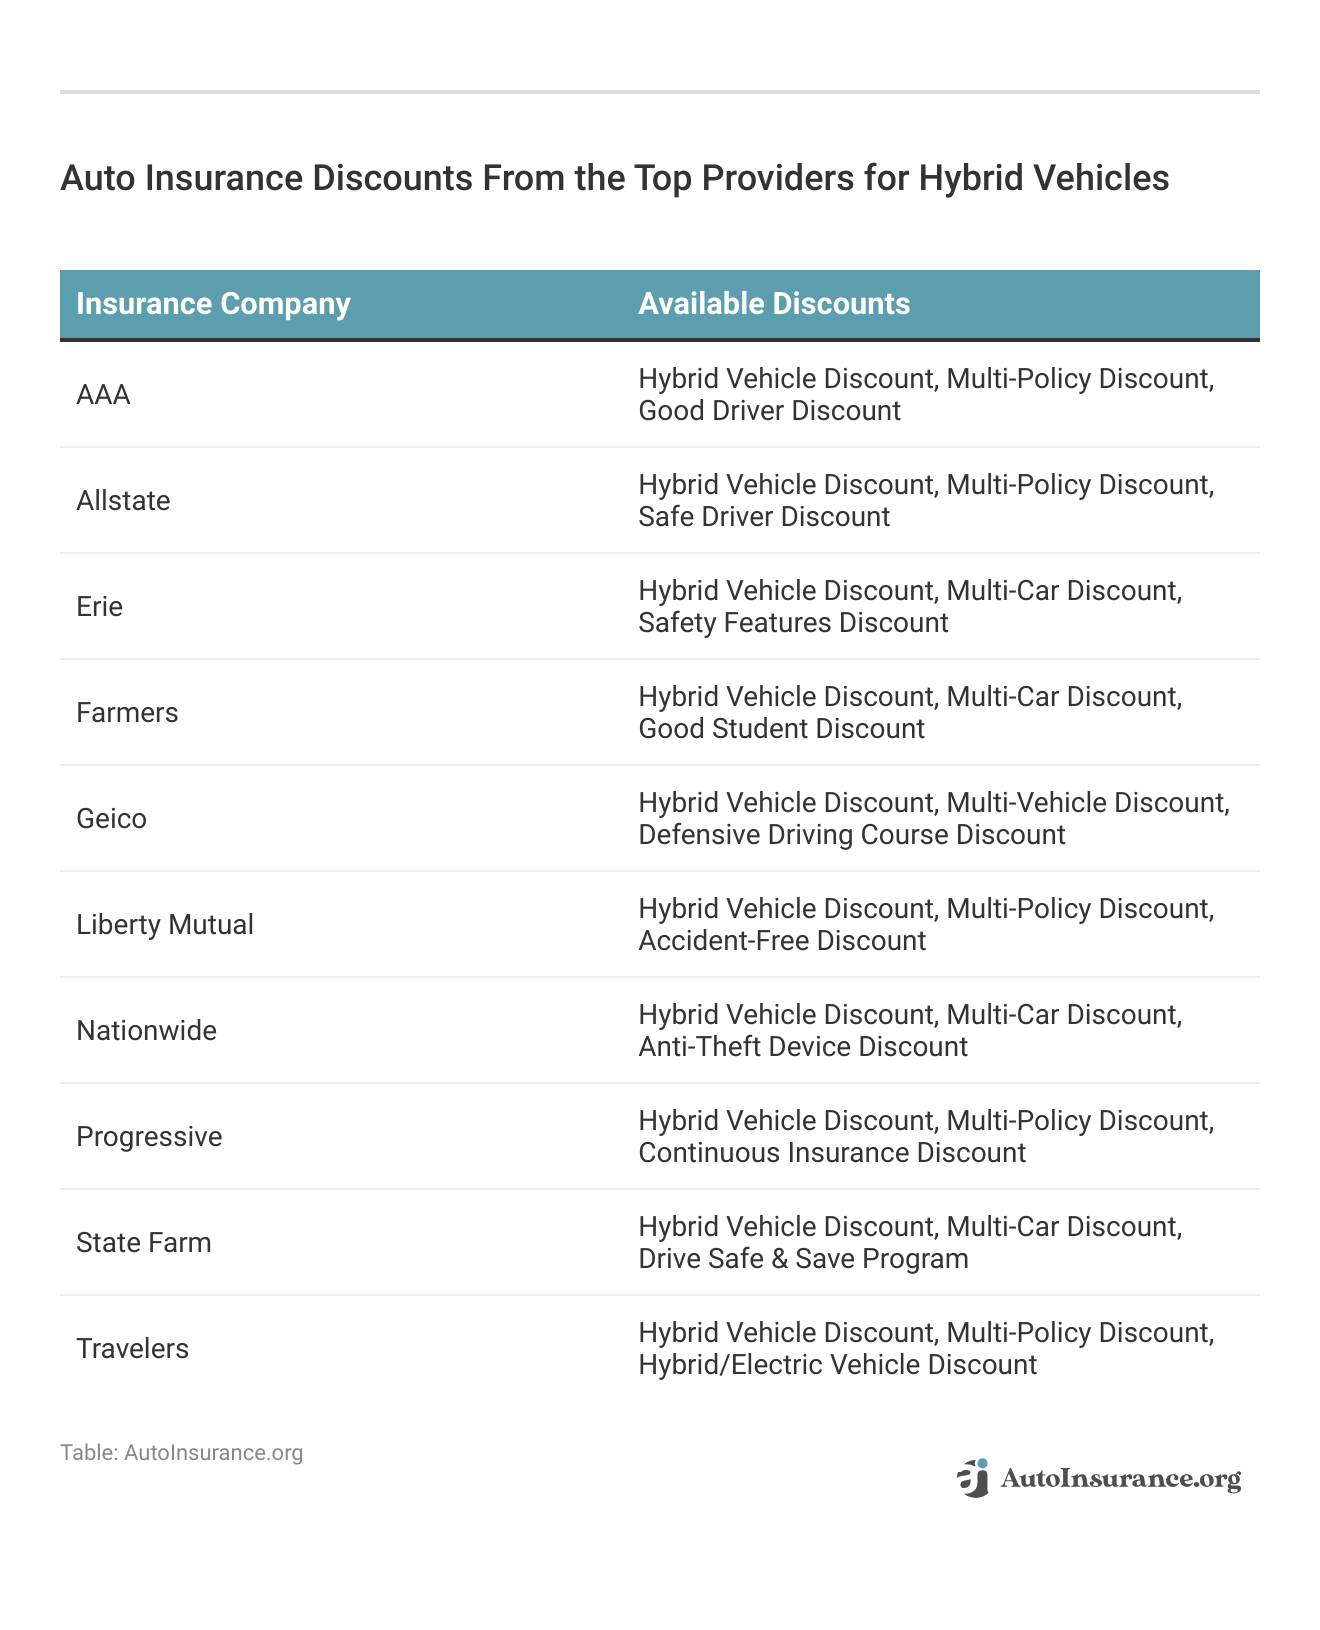 <h3>Auto Insurance Discounts From the Top Providers for Hybrid Vehicles</h3>